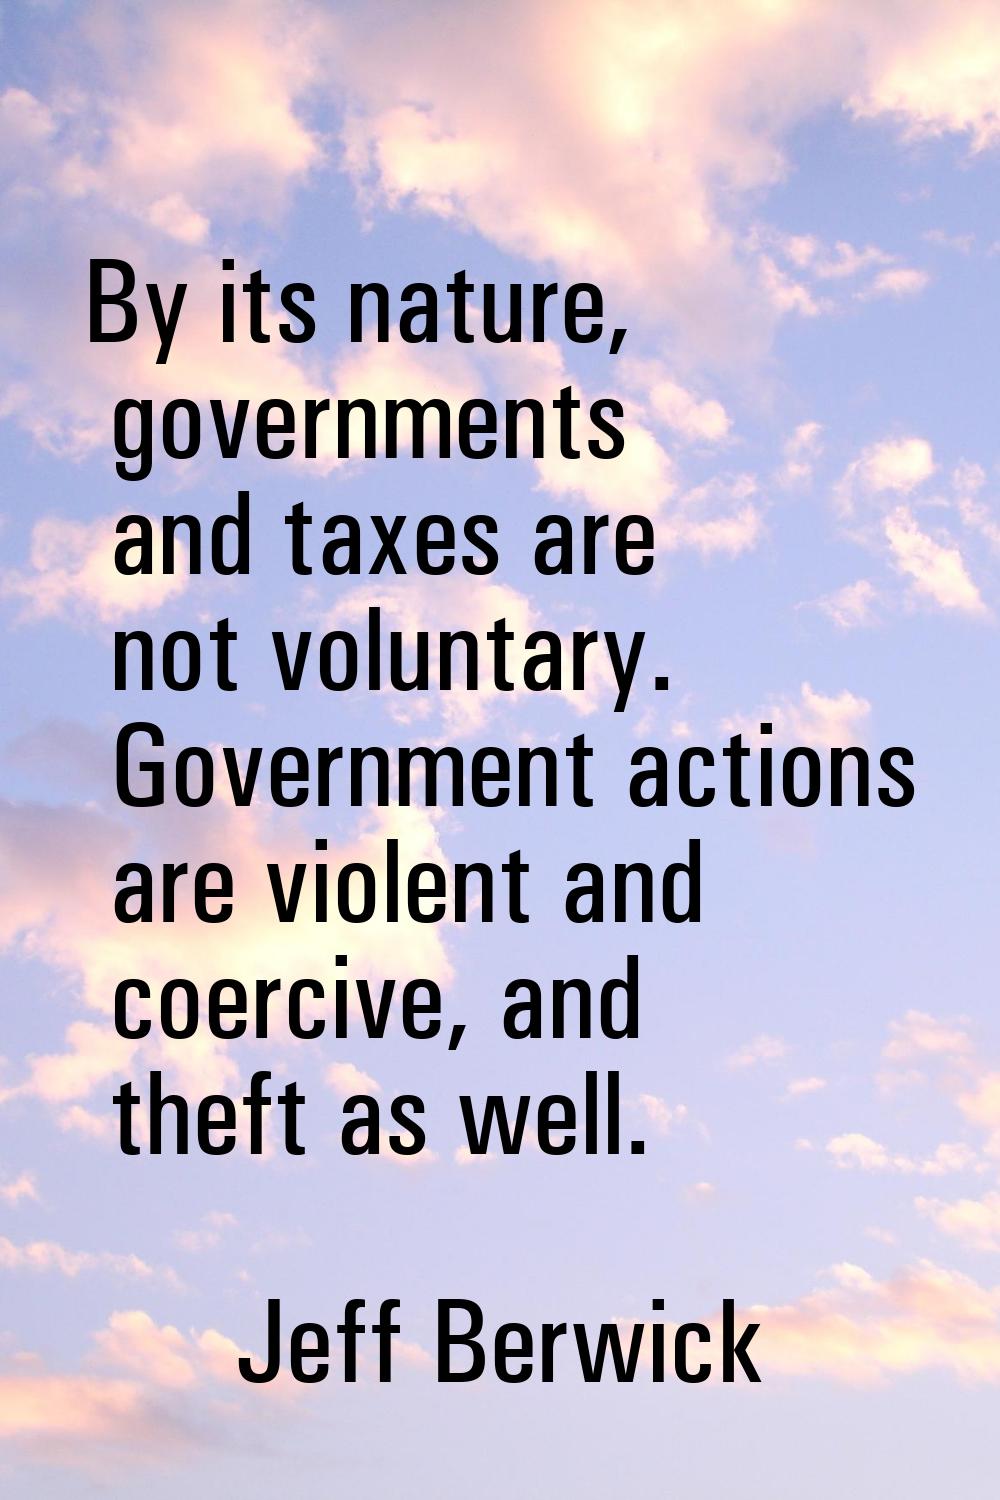 By its nature, governments and taxes are not voluntary. Government actions are violent and coercive